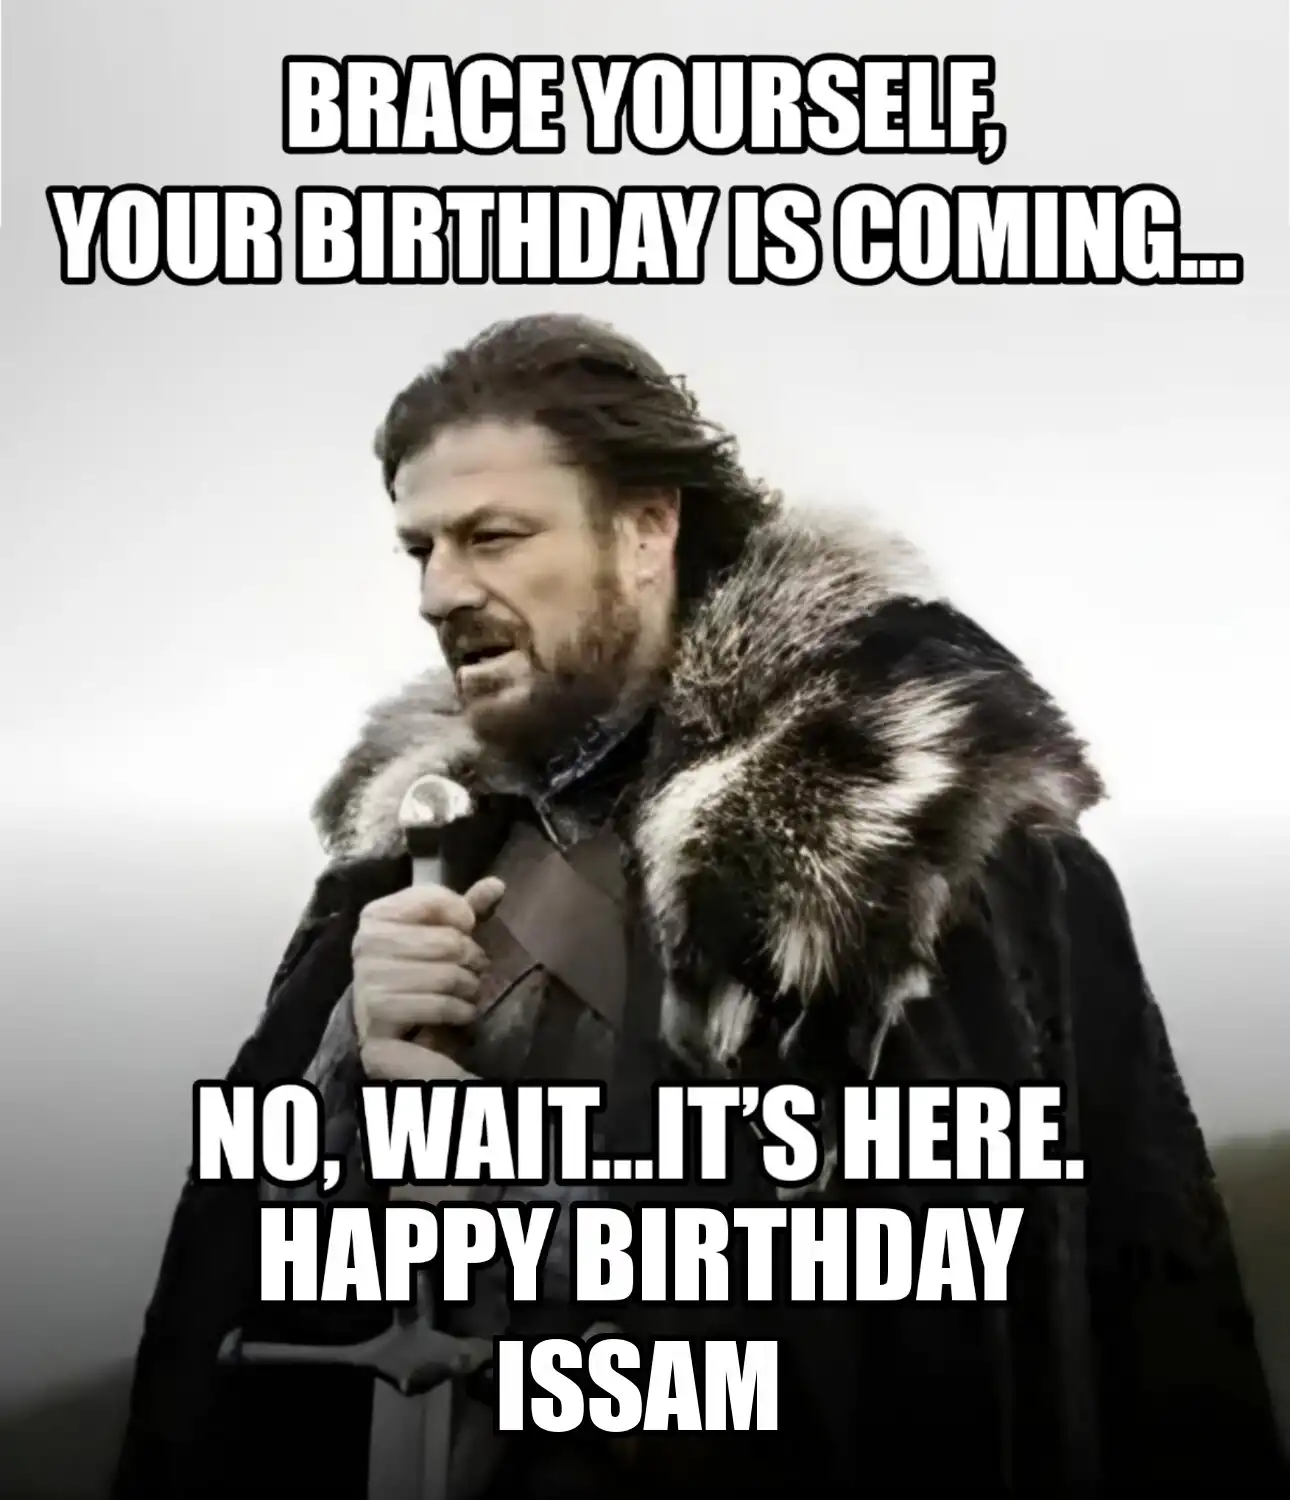 Happy Birthday Issam Brace Yourself Your Birthday Is Coming Meme